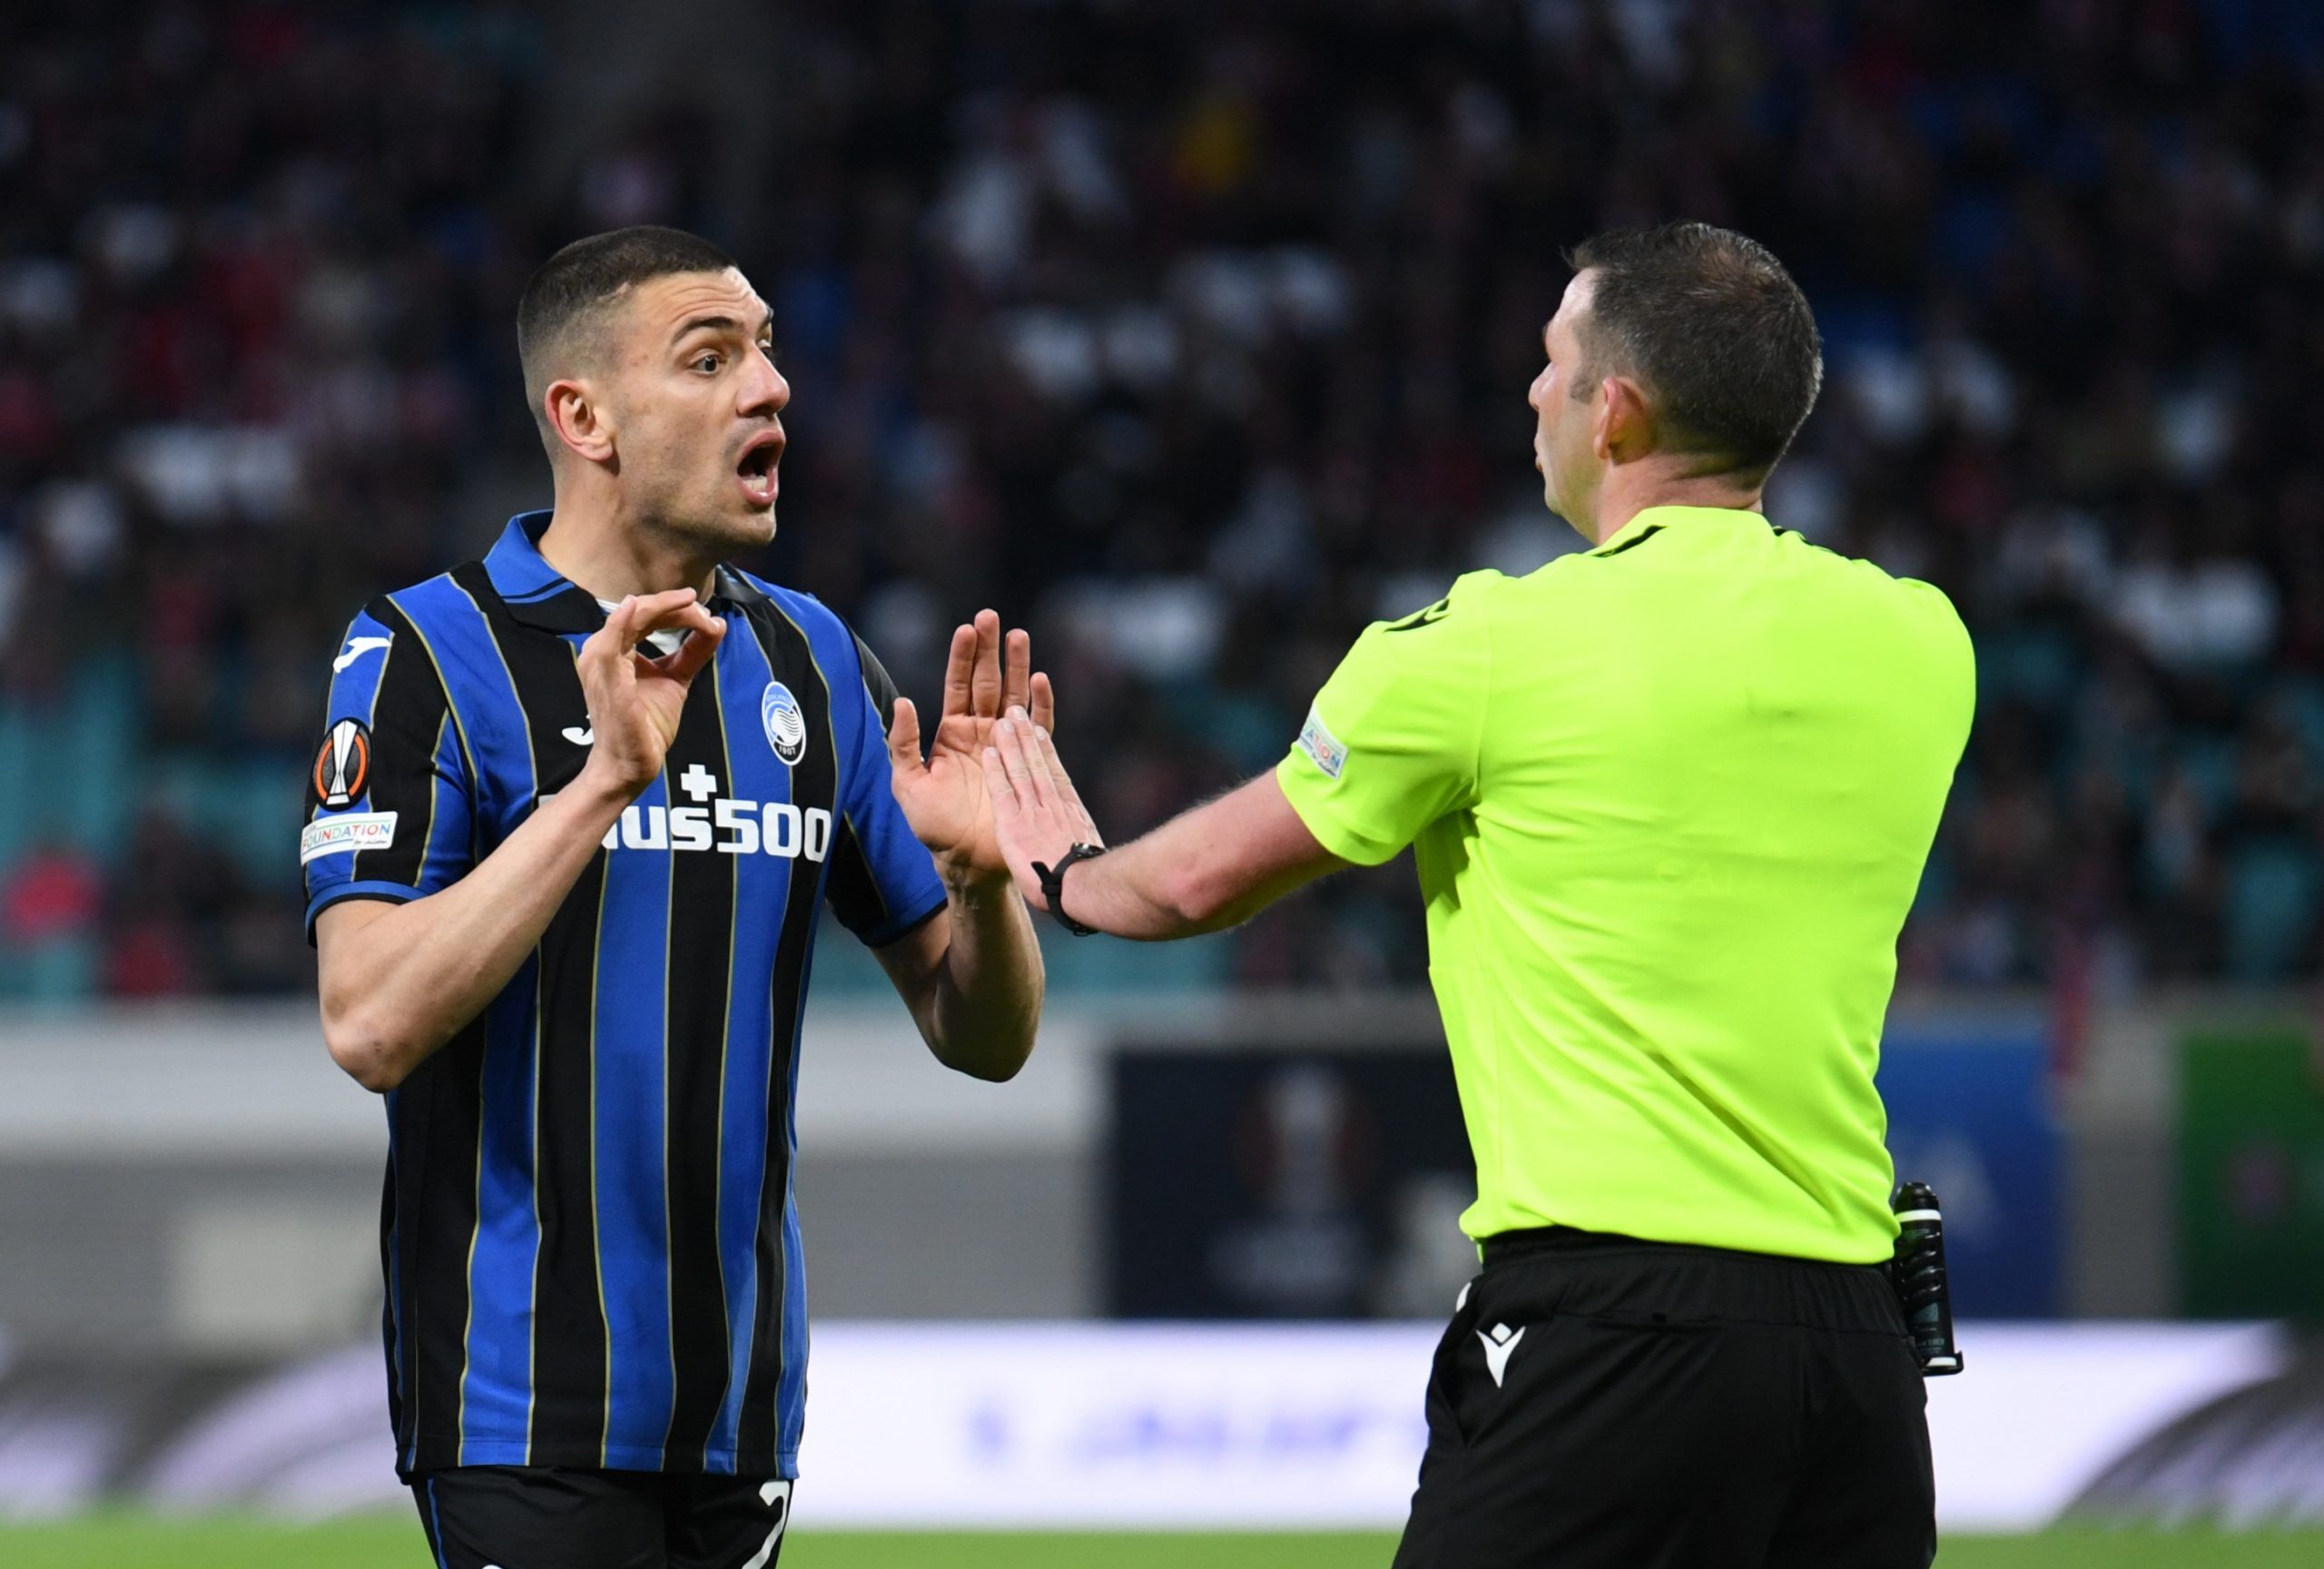 Soccer Football - Europa League - Quarter Final - First Leg - RB Leipzig v Atalanta - Red Bull Arena, Leipzig, Germany - April 7, 2022  Atalanta's Merih Demiral remonstrates with the referee REUTERS/Annegret Hilse